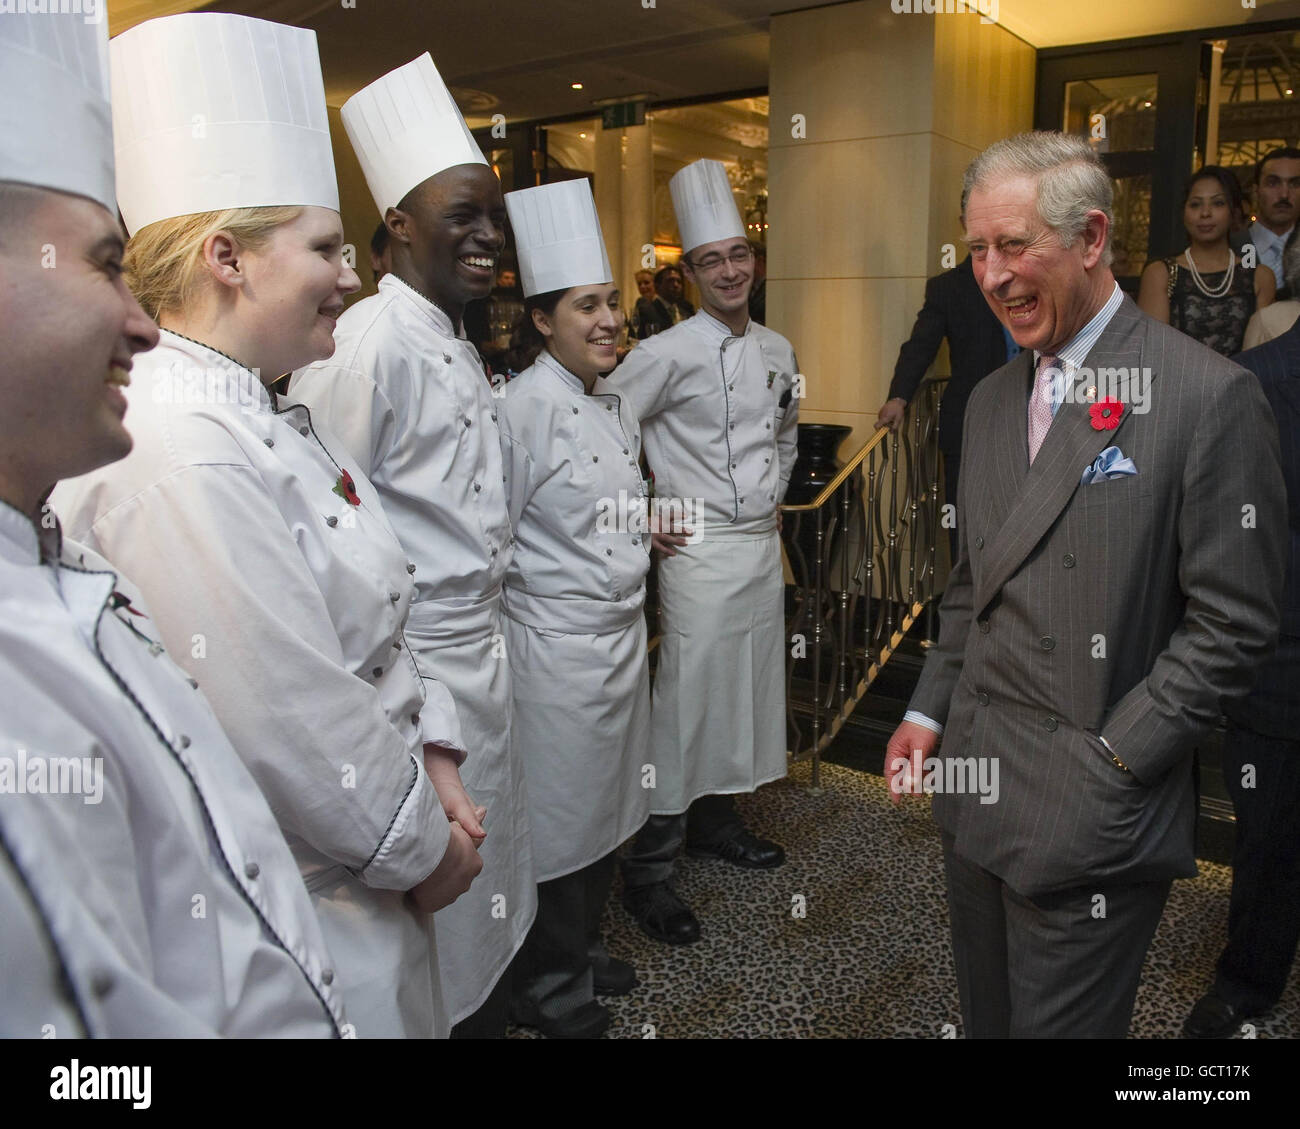 Savoy grill stock photography images - Alamy